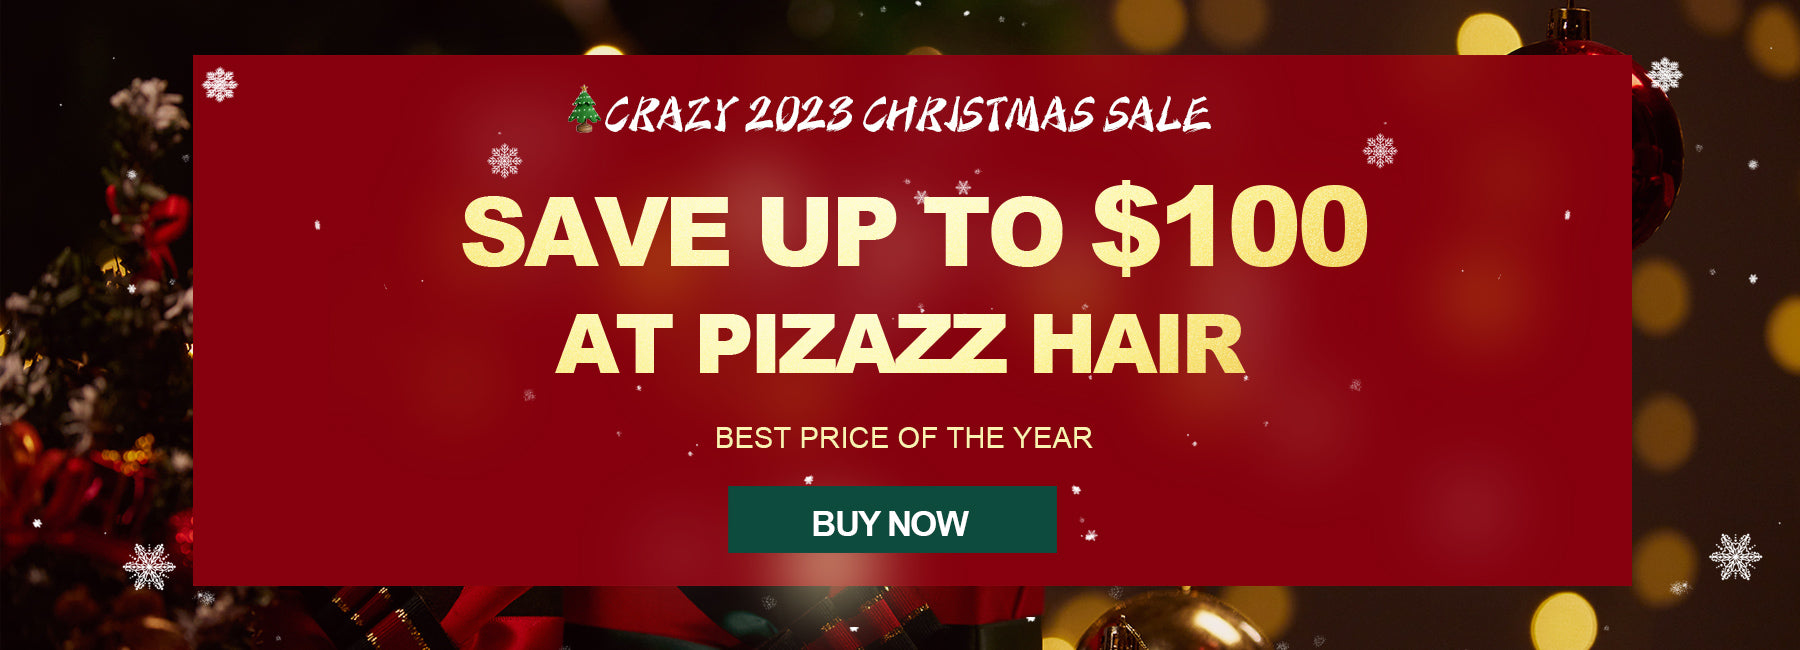 Crazy 2023 Christmas Sale: Save Up to $100 at Pizazz Hair